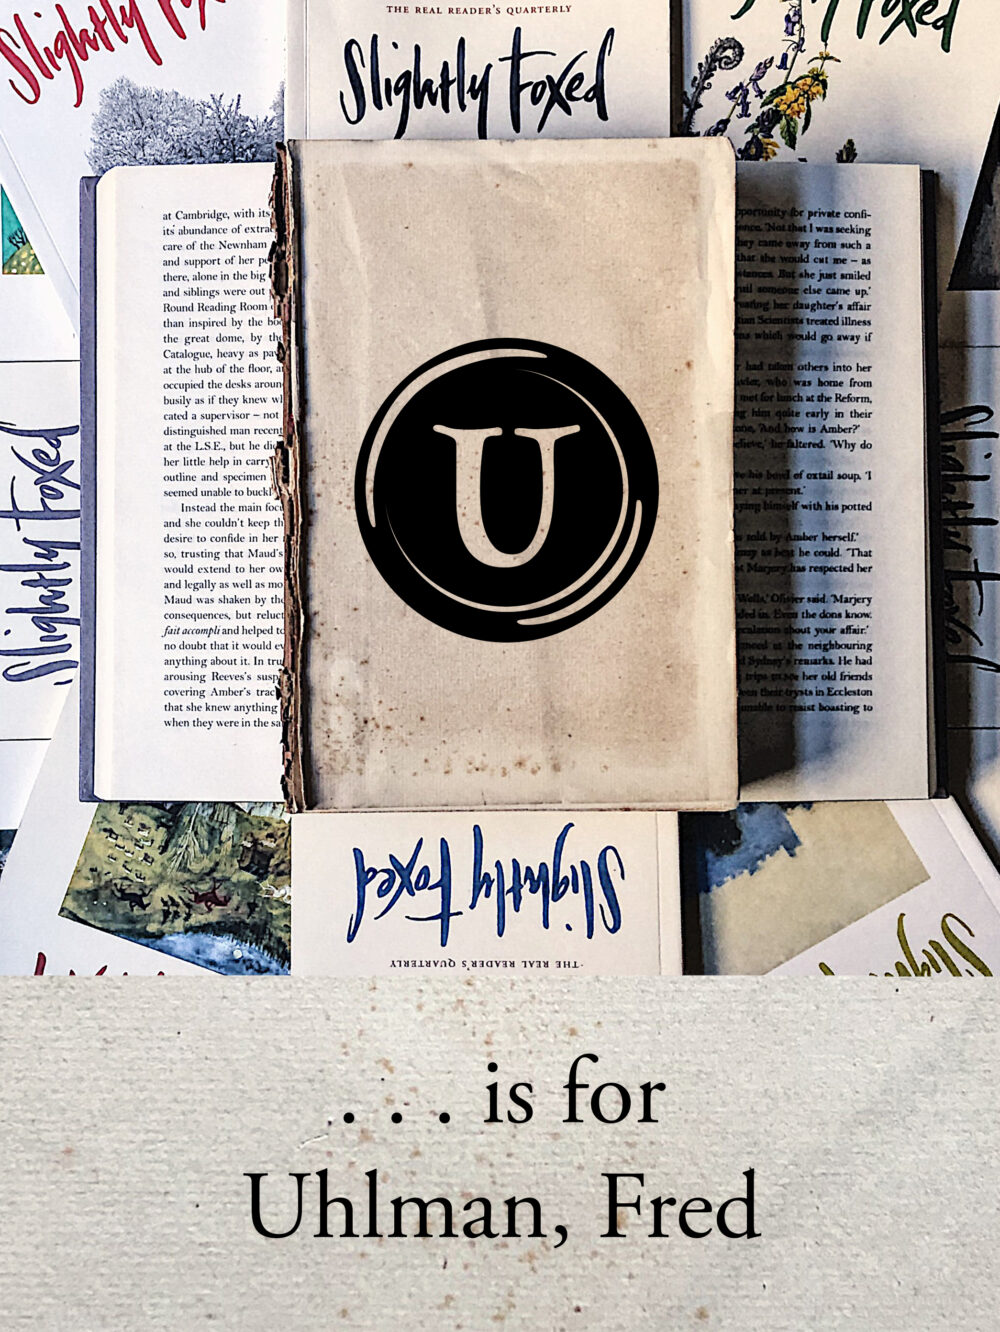 U is for Uhlman, Fred | Martin Sorrell on Reunion, Slightly Foxed Issue 69